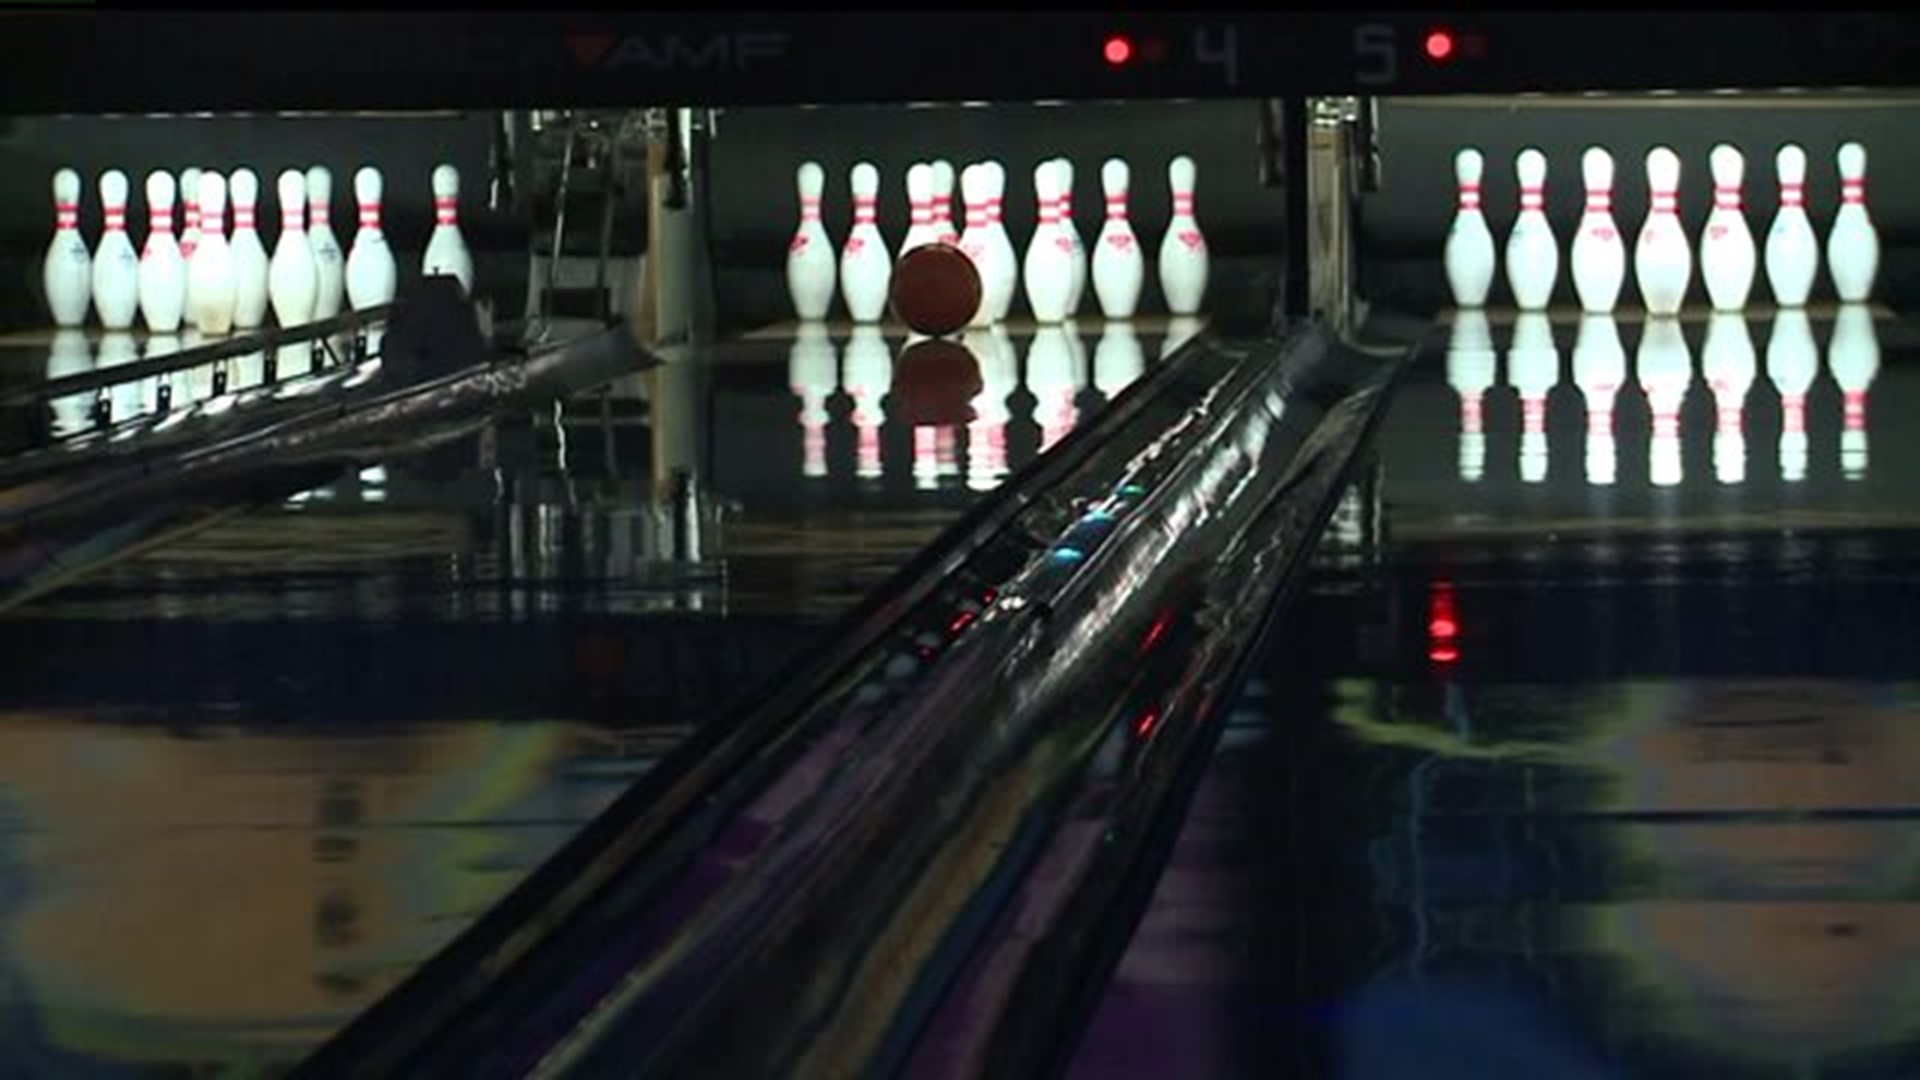 Special glasses give York County bowlers a different perspective